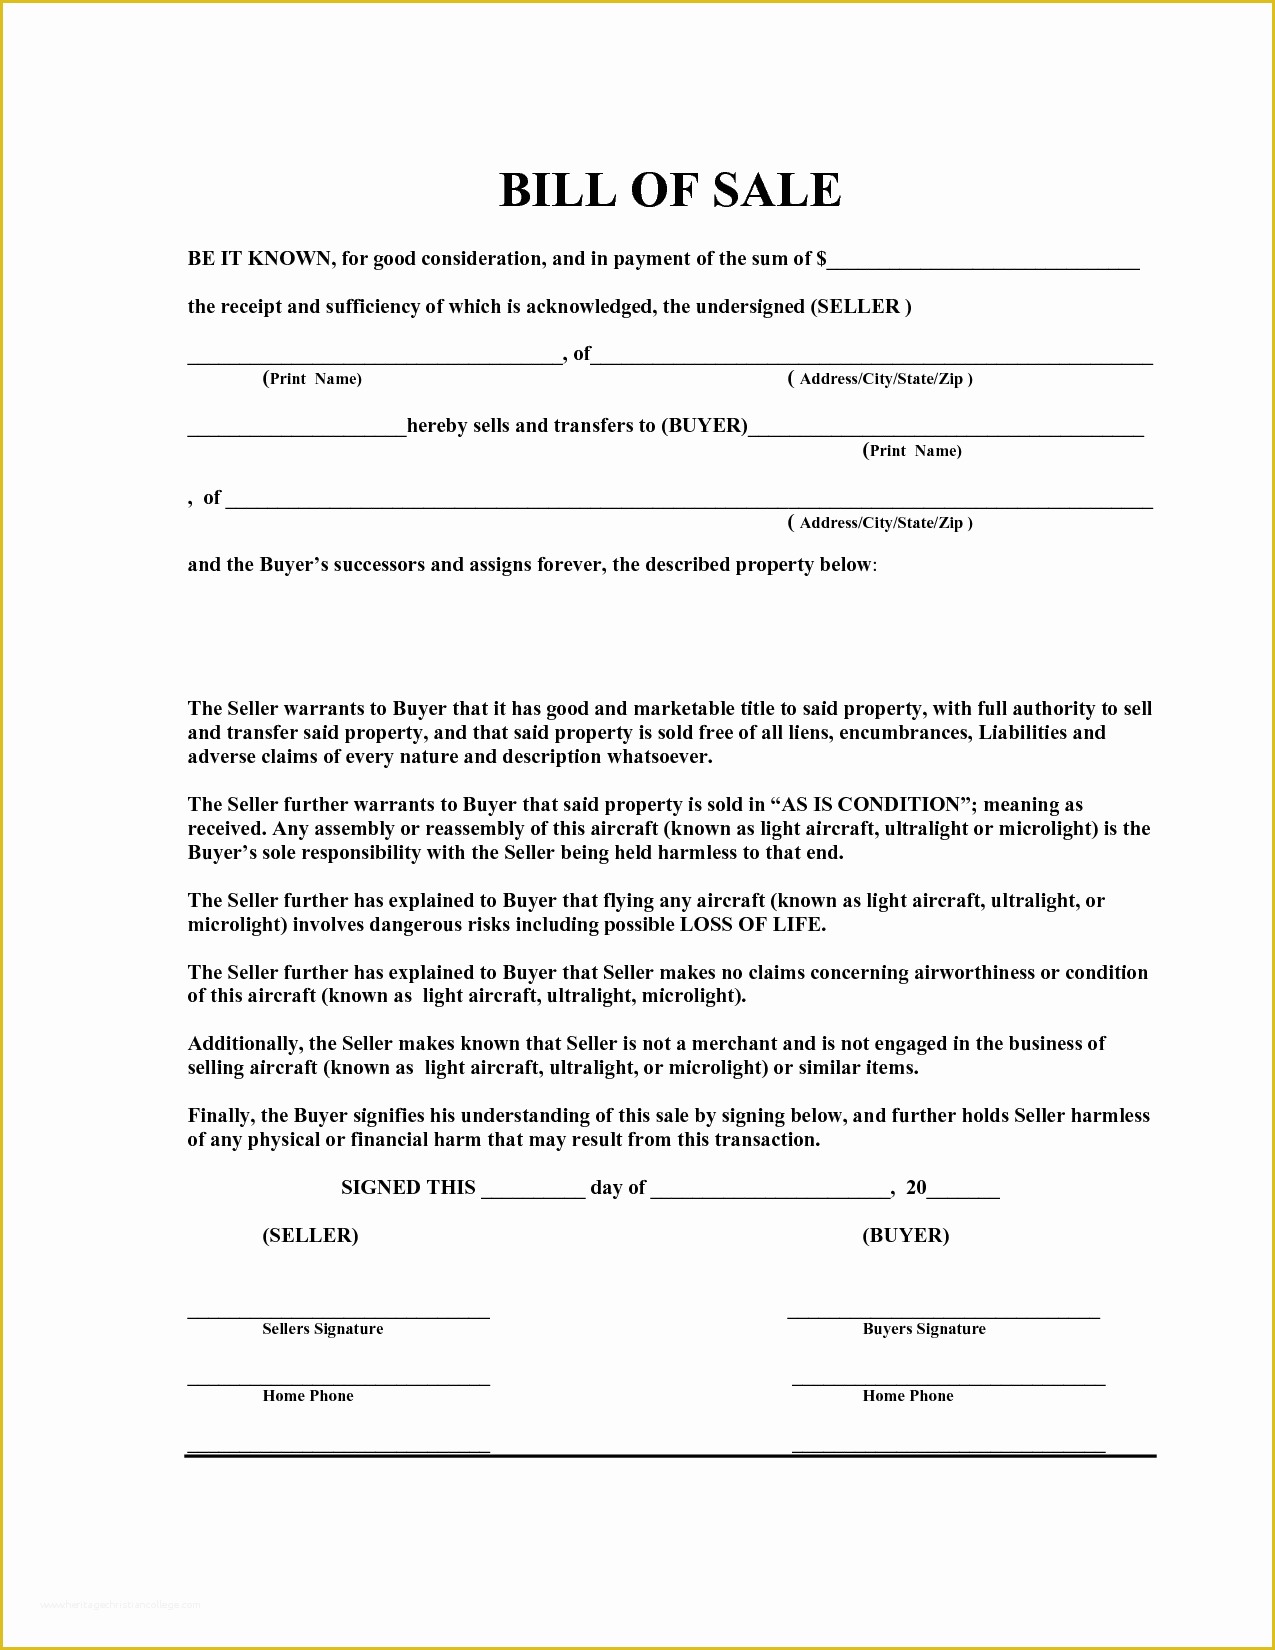 Free Bill Of Sales Template for Used Car as is Of Free Bill Of Sale Template Pdf by Marymenti as is Bill